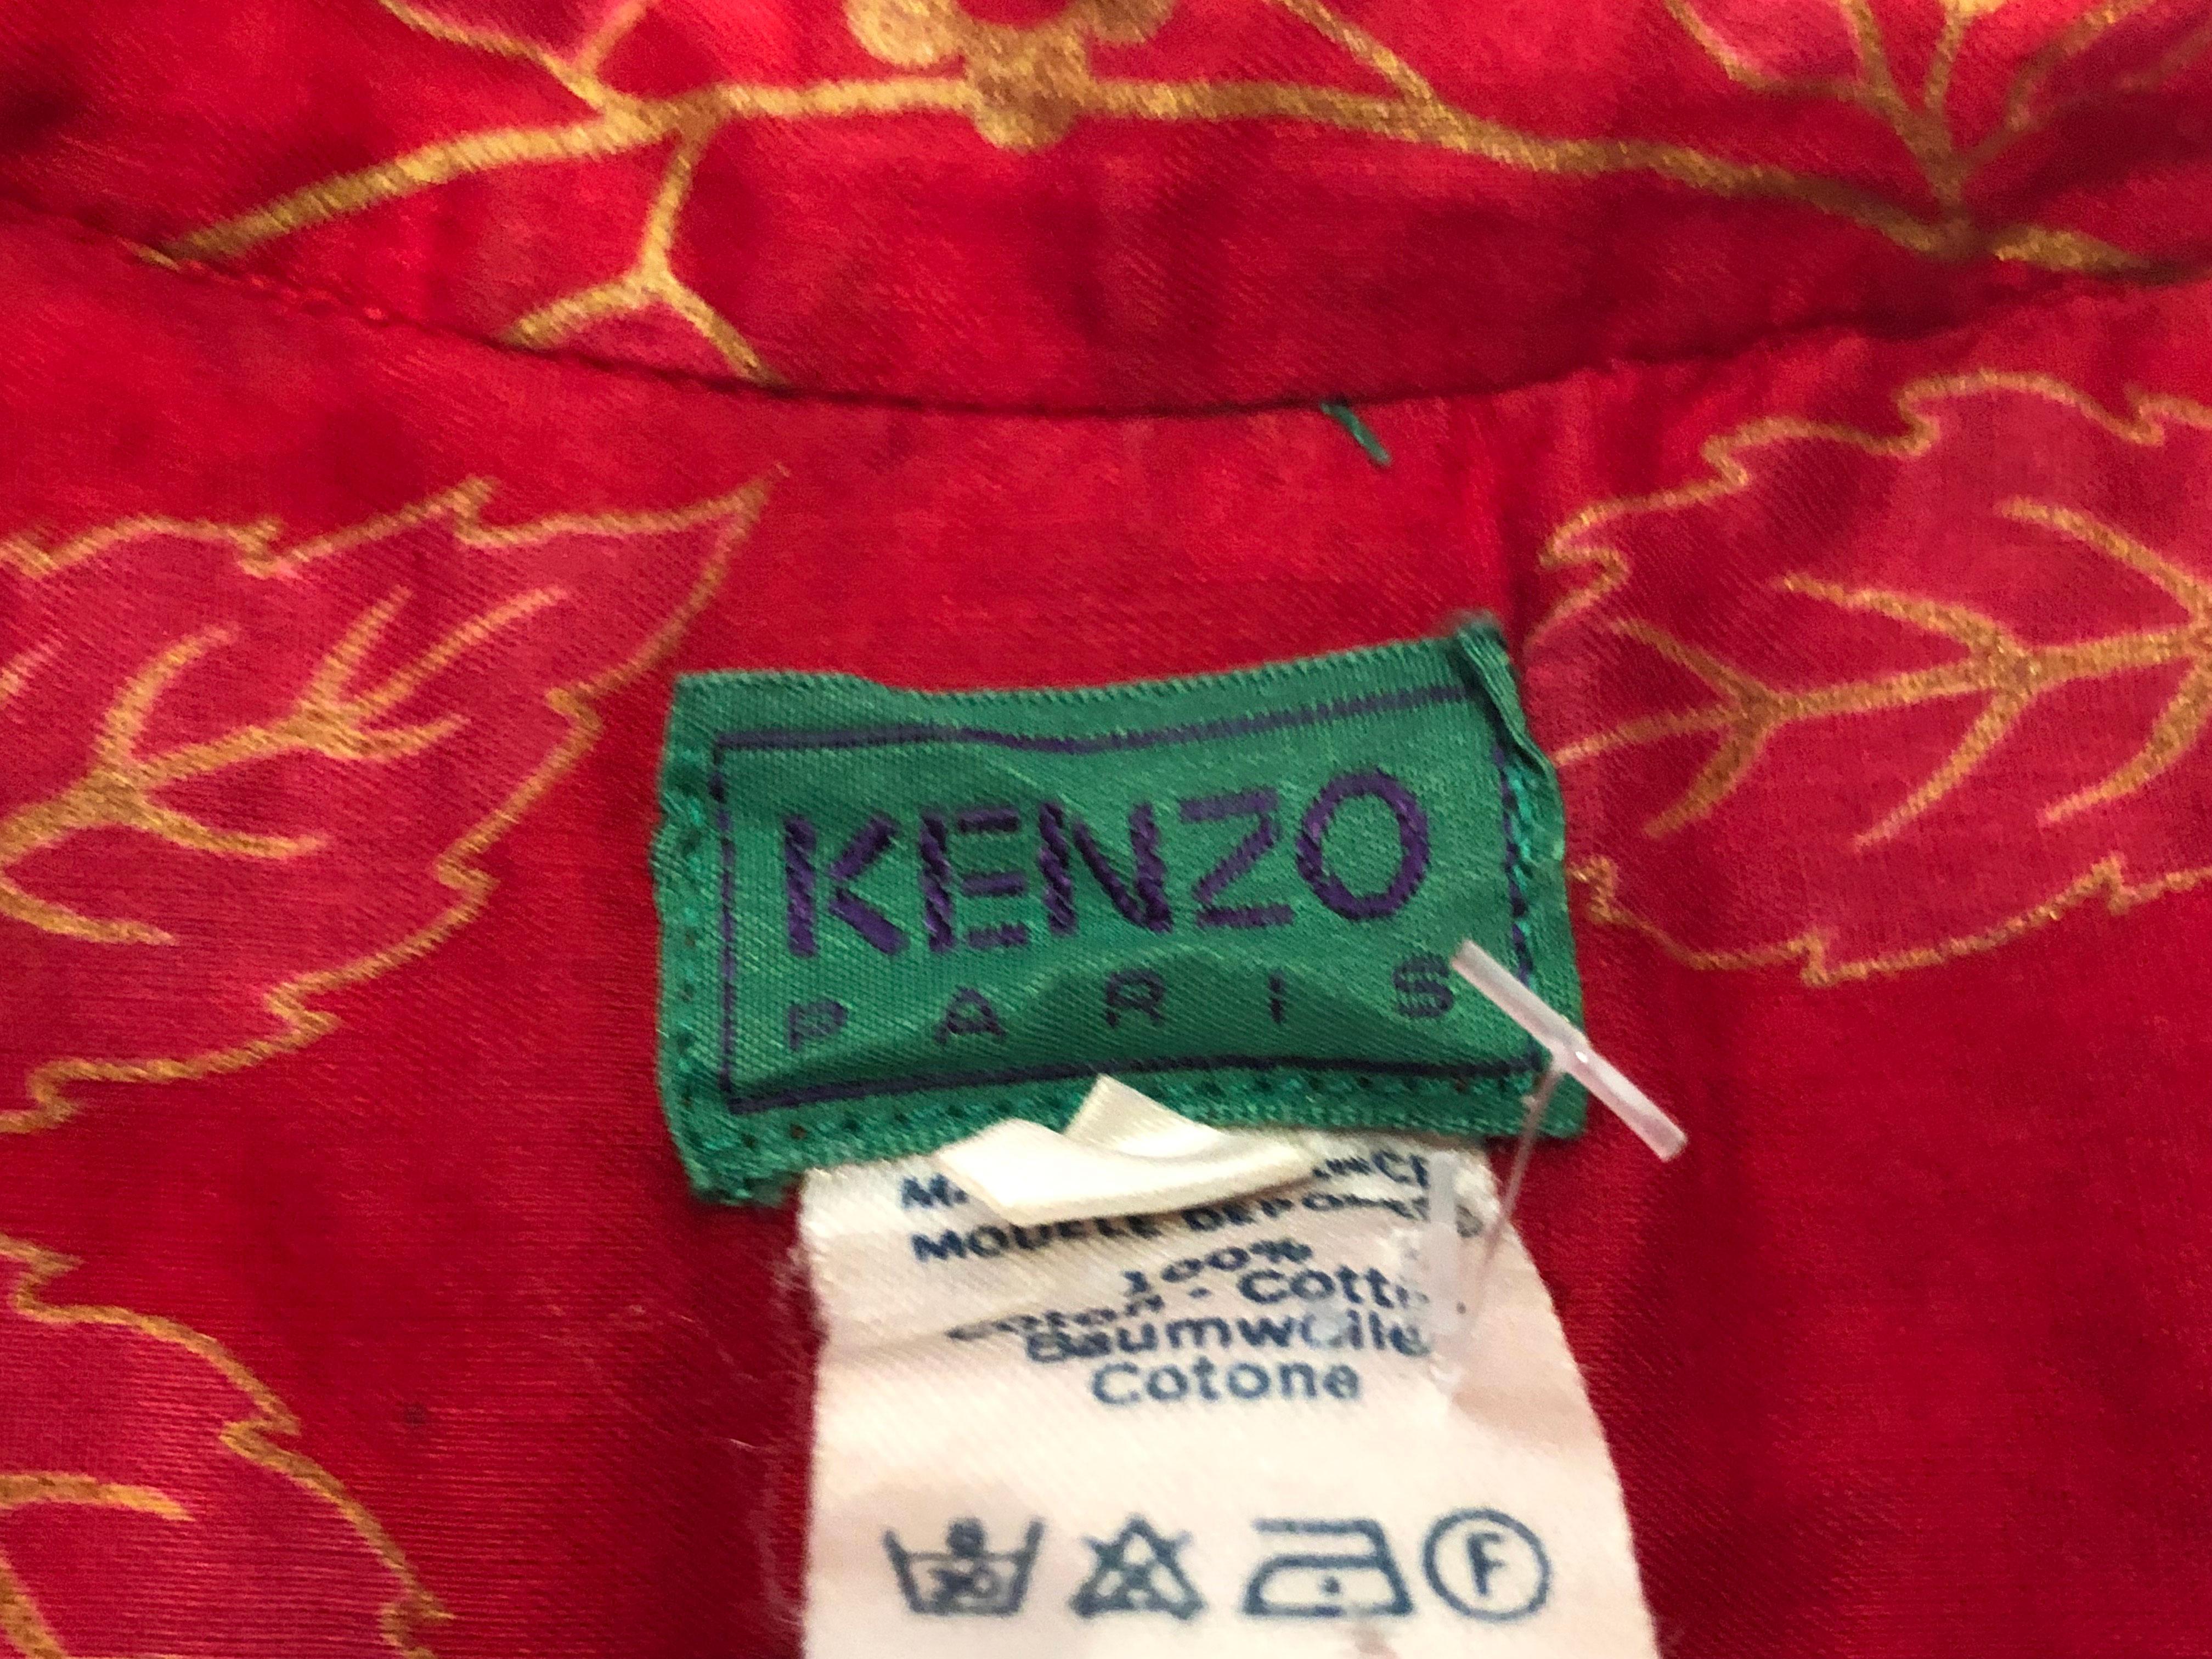 Vintage Kenzo Paris Red and Gold Top For Sale 1